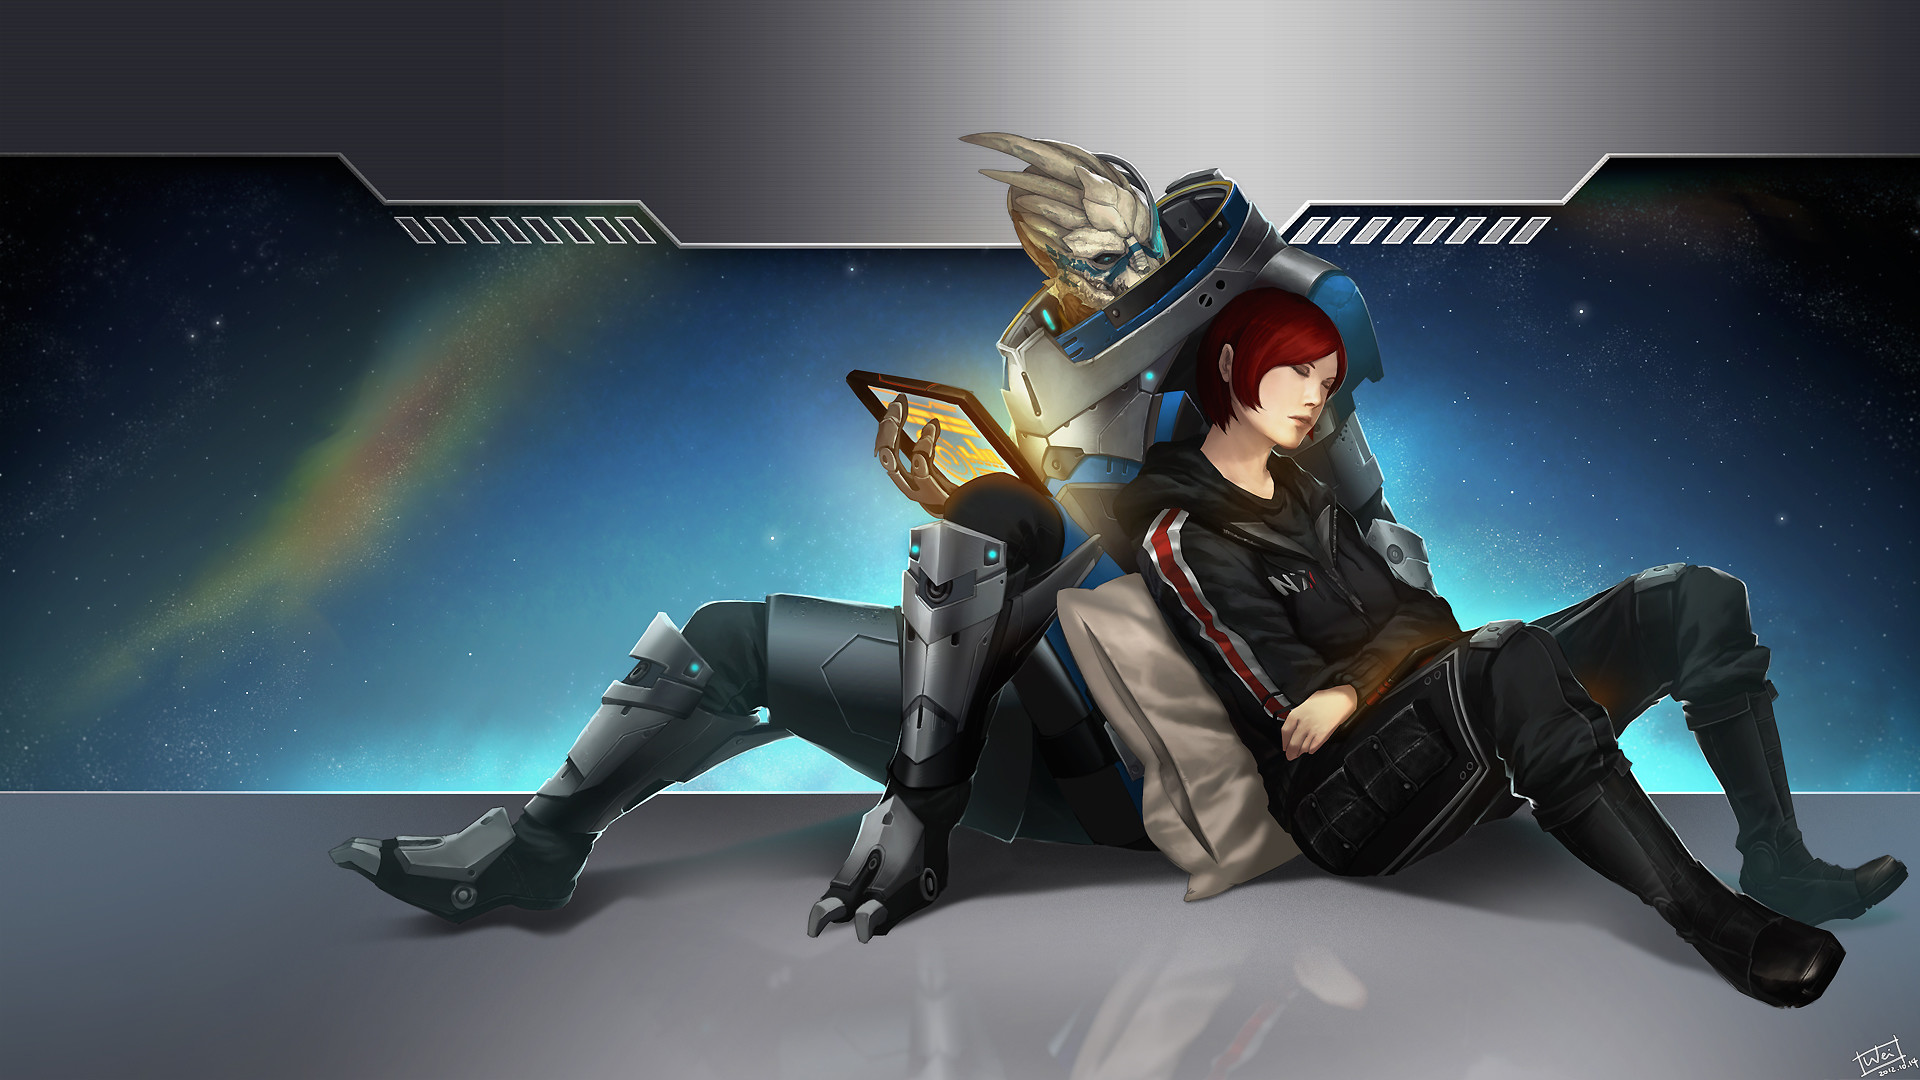 1920x1080 That's been my desktop background for a looooong time now :) Â· Mass Effect  ...